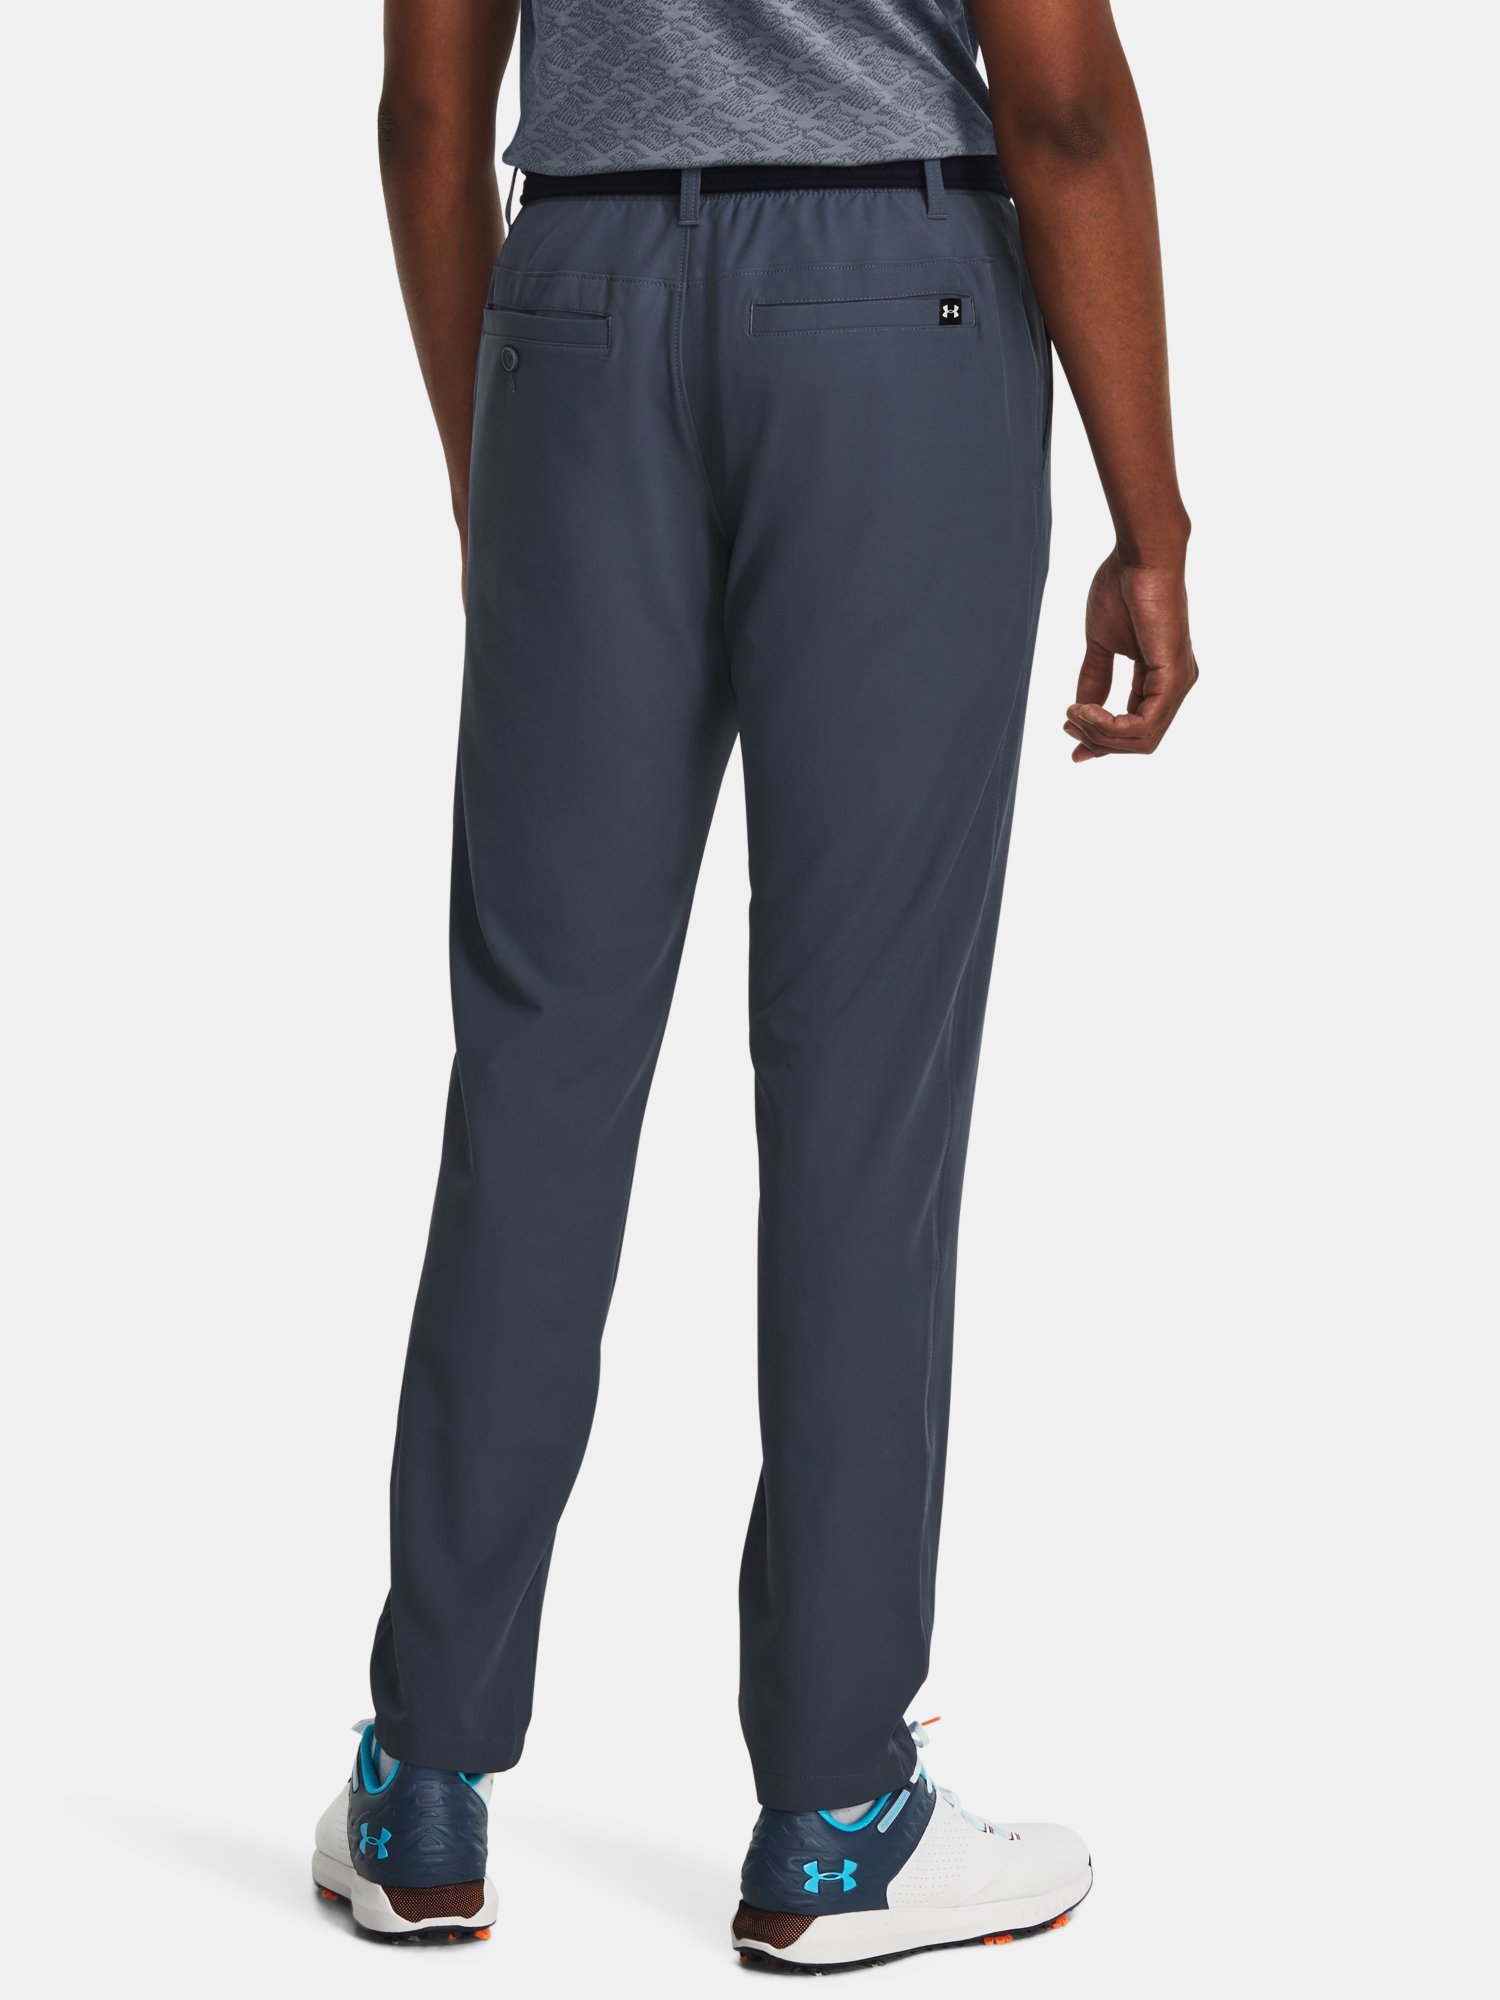 Nohavice Under Armour UA Drive Tapered Pant - sivá